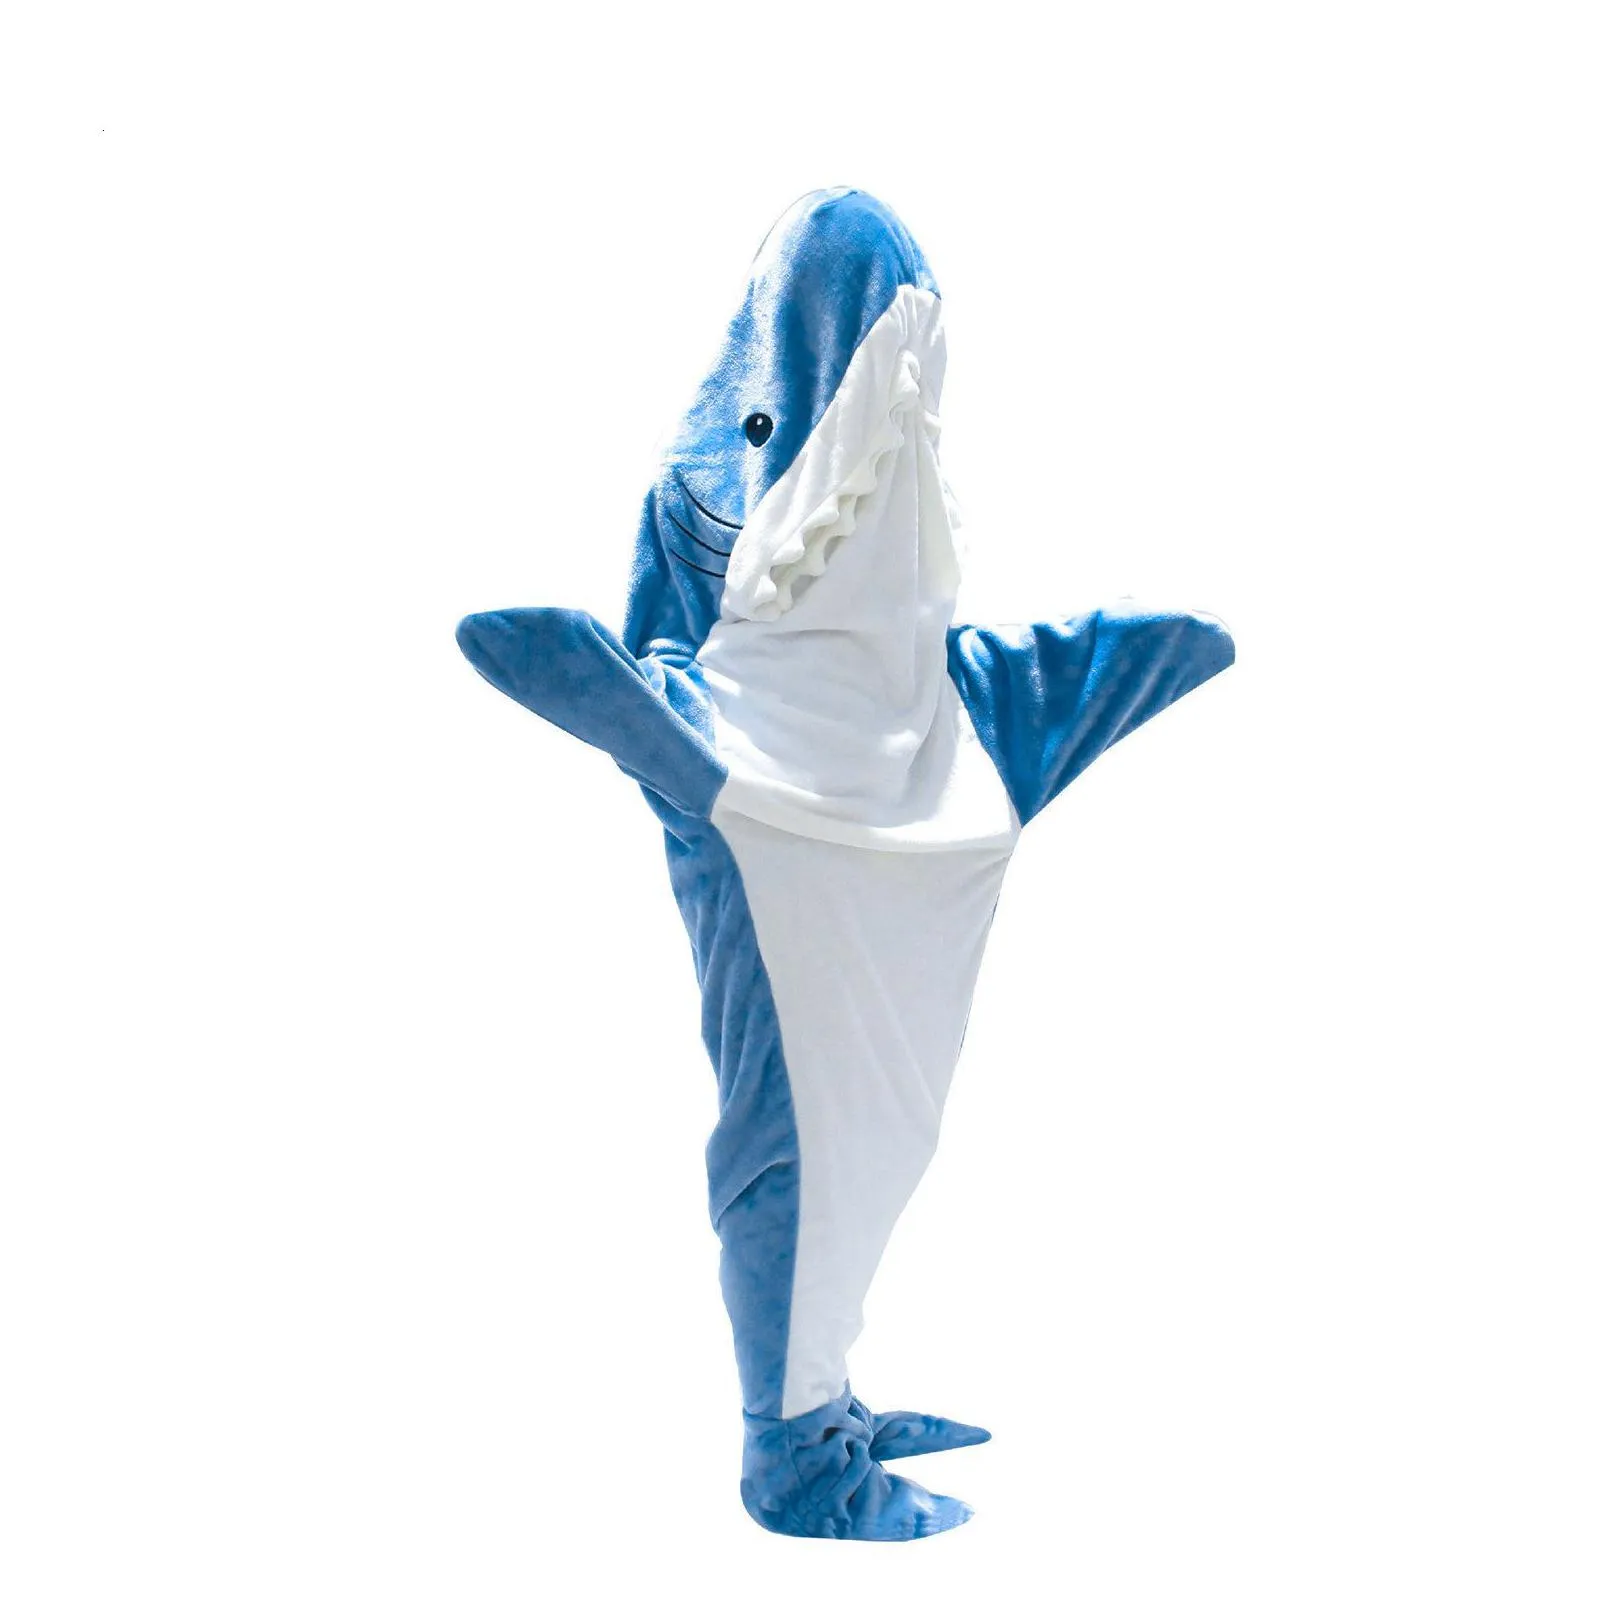 Blankets Blankets Soft Warm Shark Blanket For Adts With Hooded Design And Loose Jumpsuit 230809 Drop Delivery Home Garden Home Textile Dhnwy